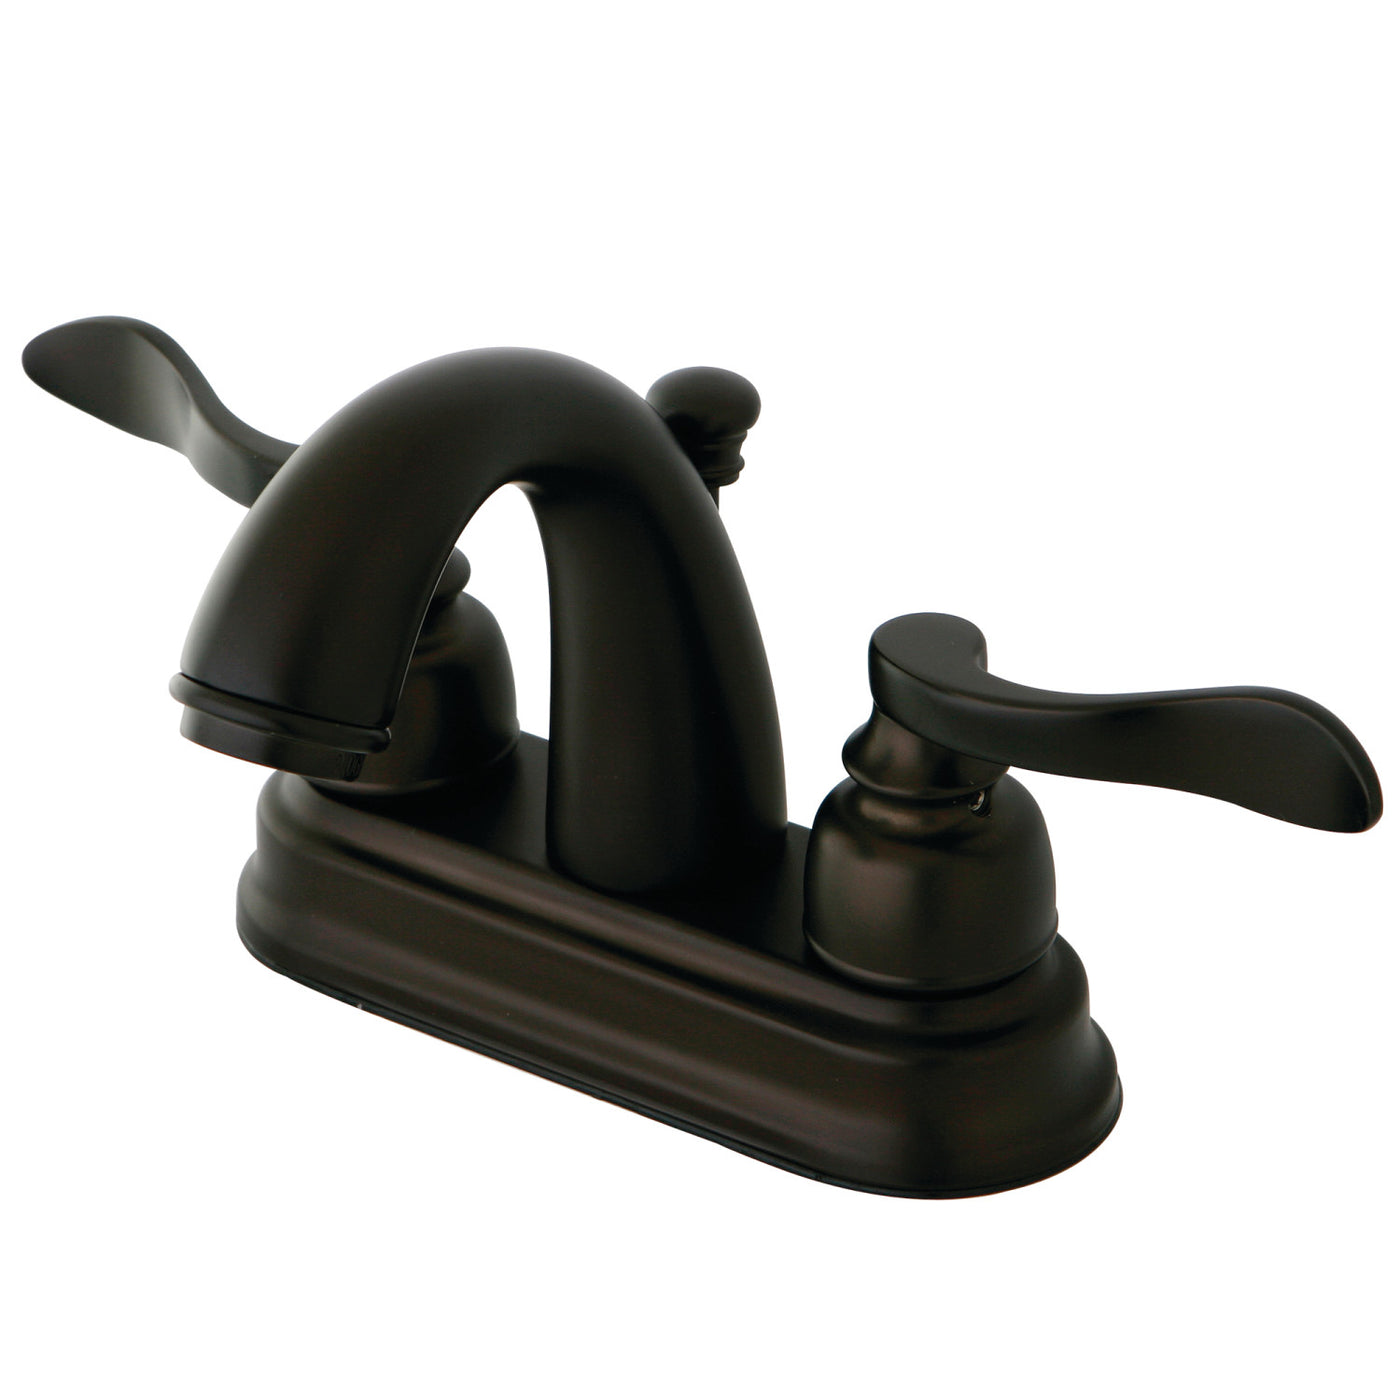 Elements of Design EB8615NFL 4-Inch Centerset Bathroom Faucet with Retail Pop-Up, Oil Rubbed Bronze